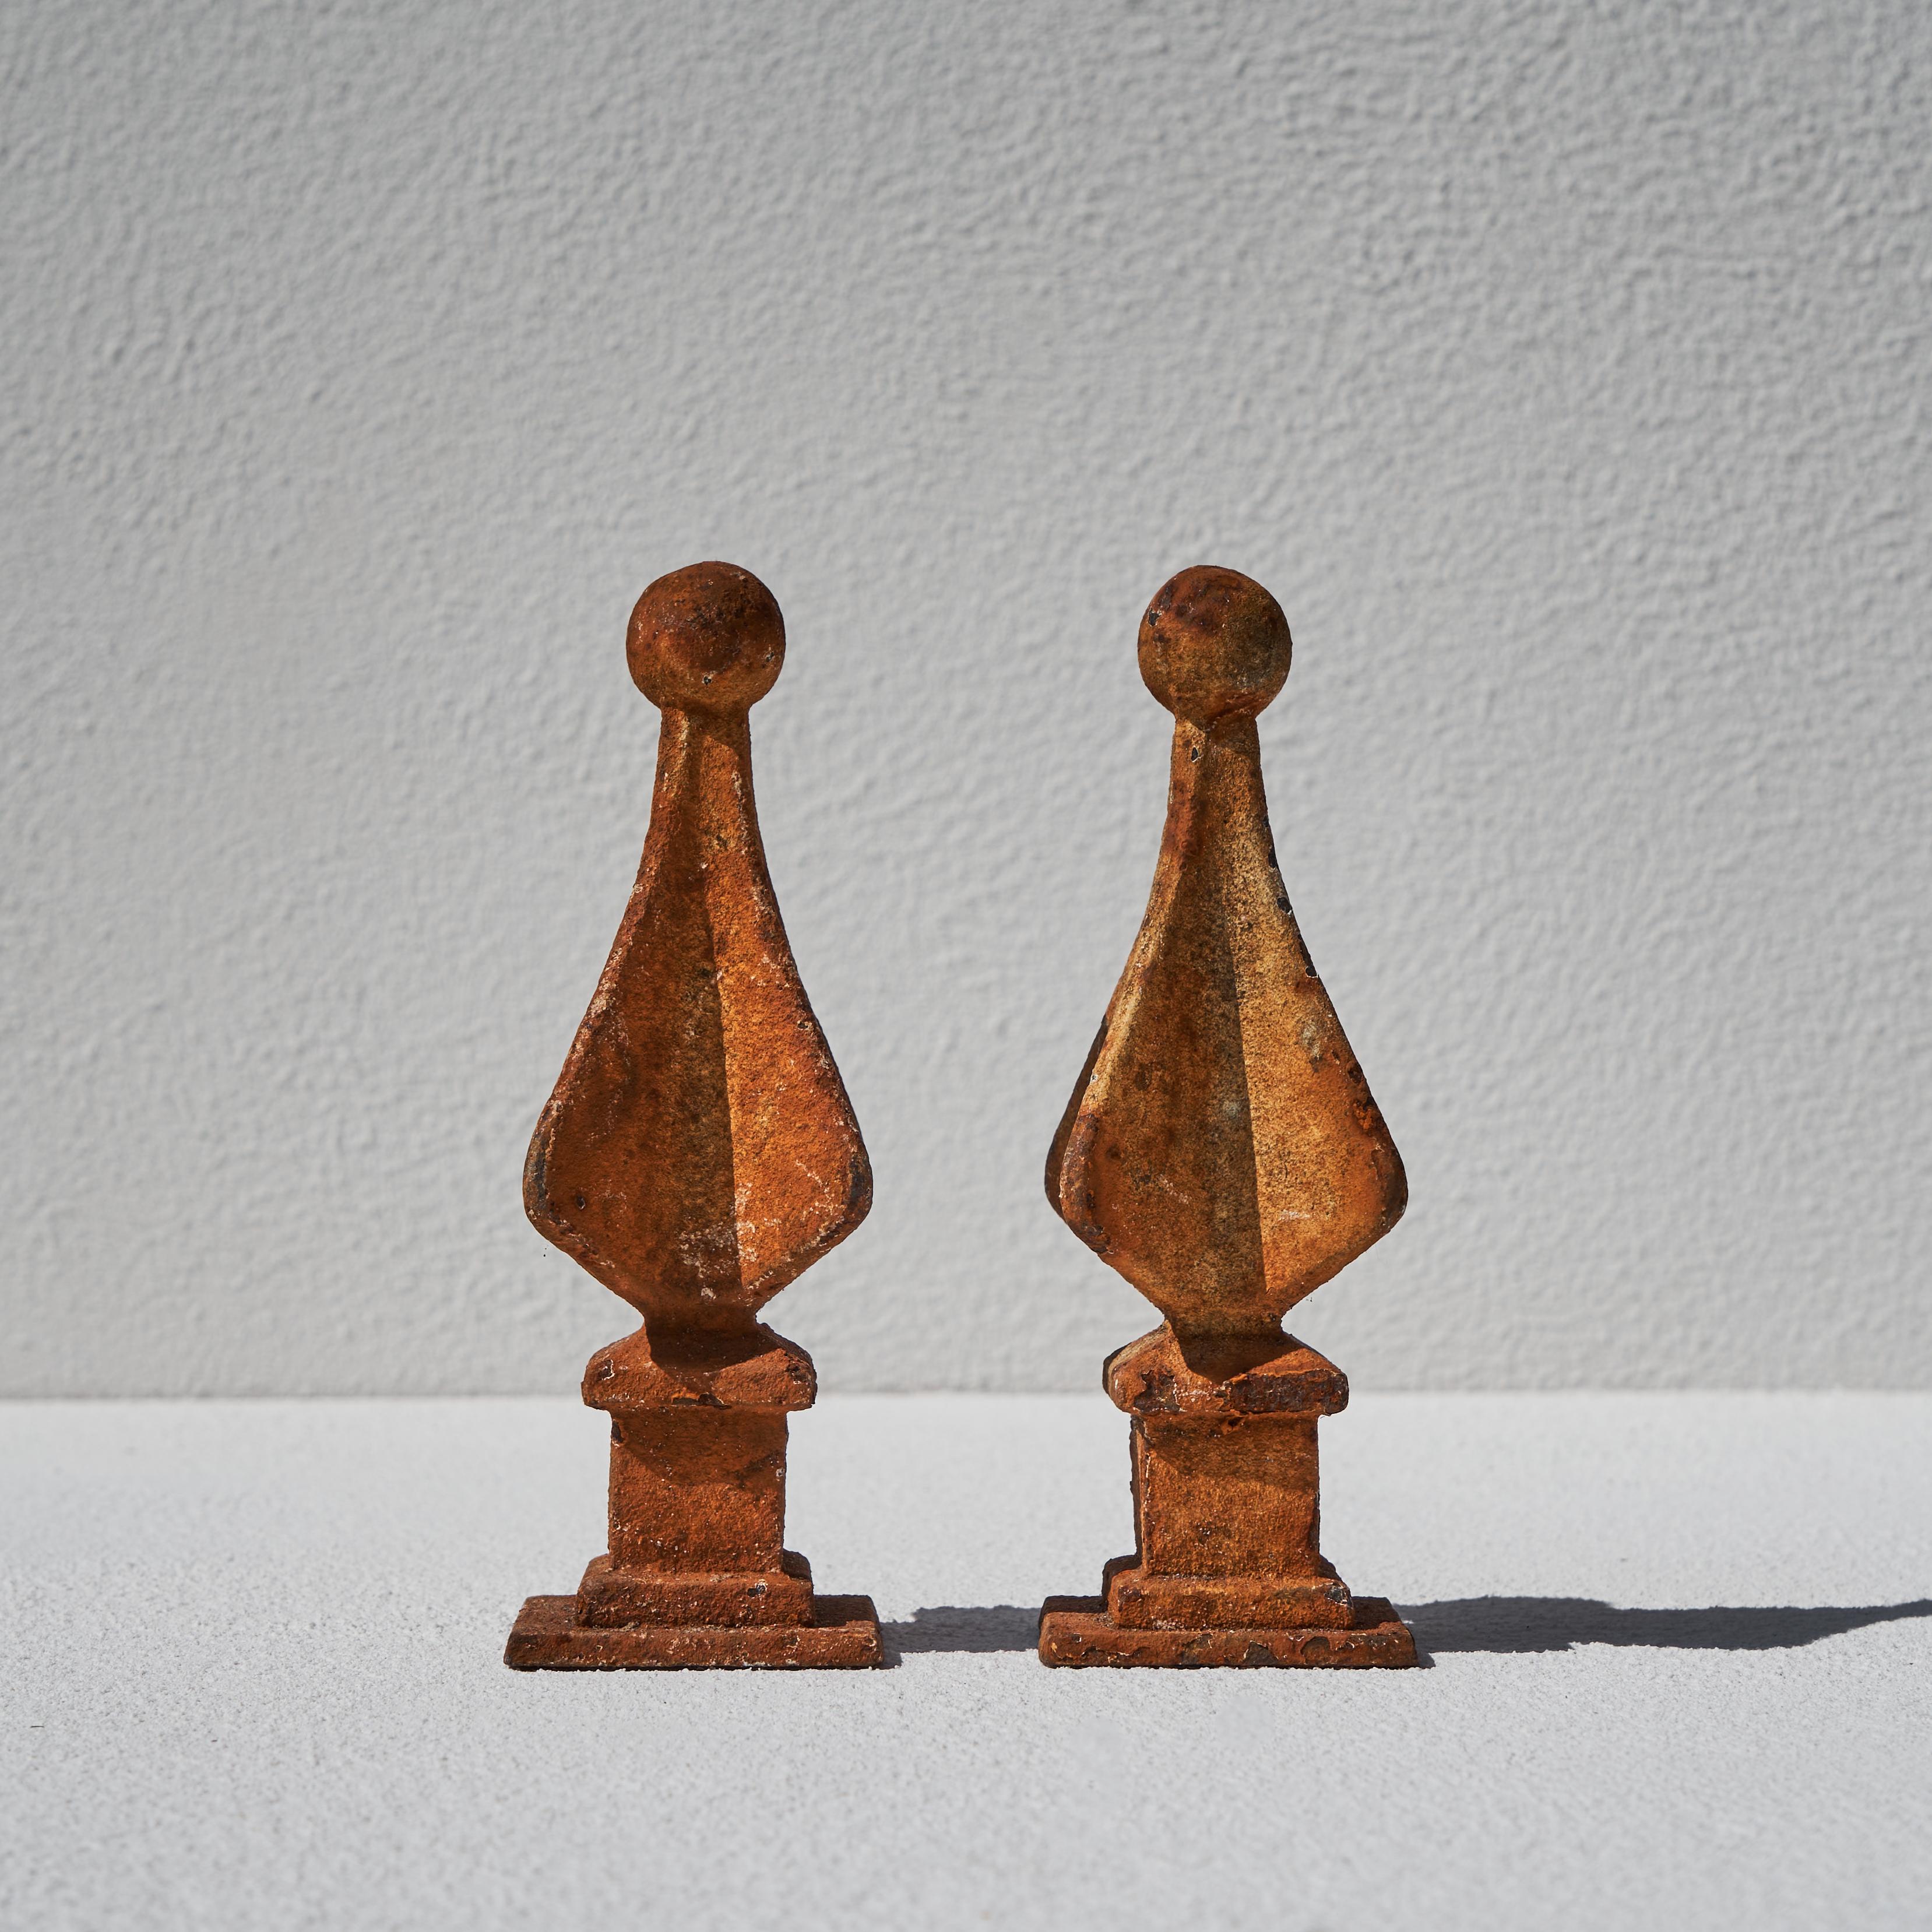 Hand-Crafted Set of 4 Rusted 19th Century Decorative Finials For Sale